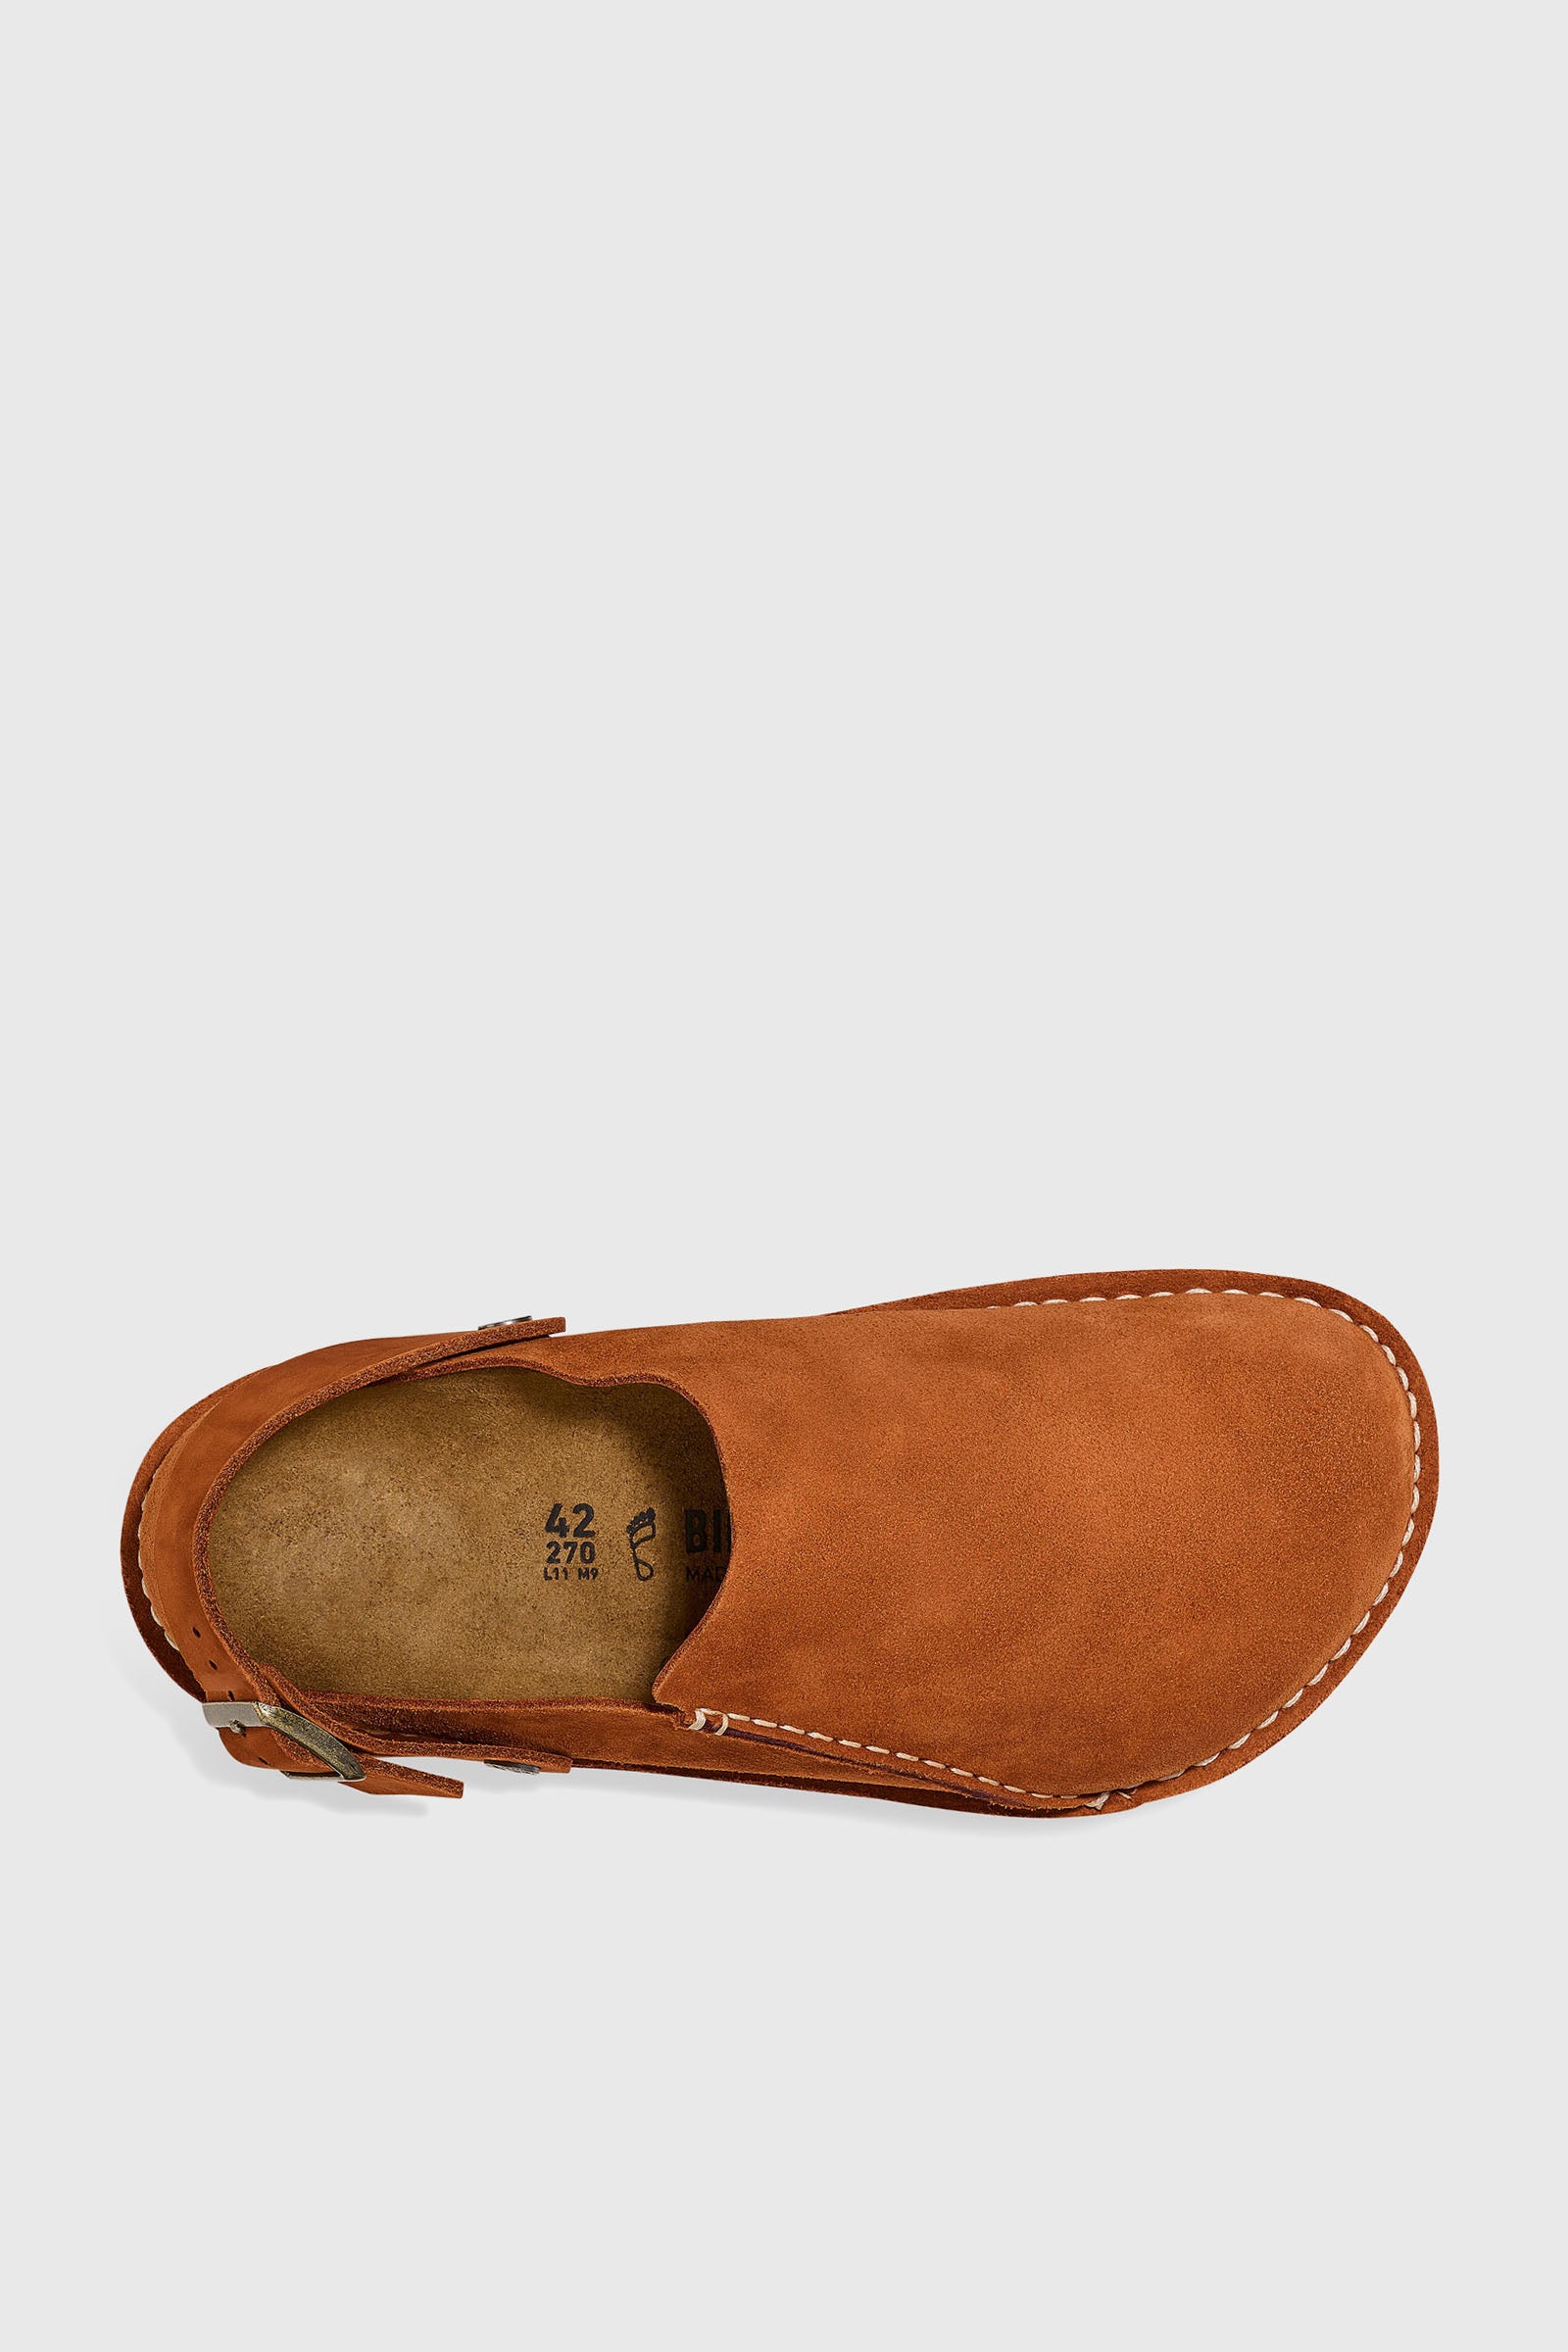 "Lutry Premium, Mink Suede Tobacco, in Brown Leather for Women" - 4